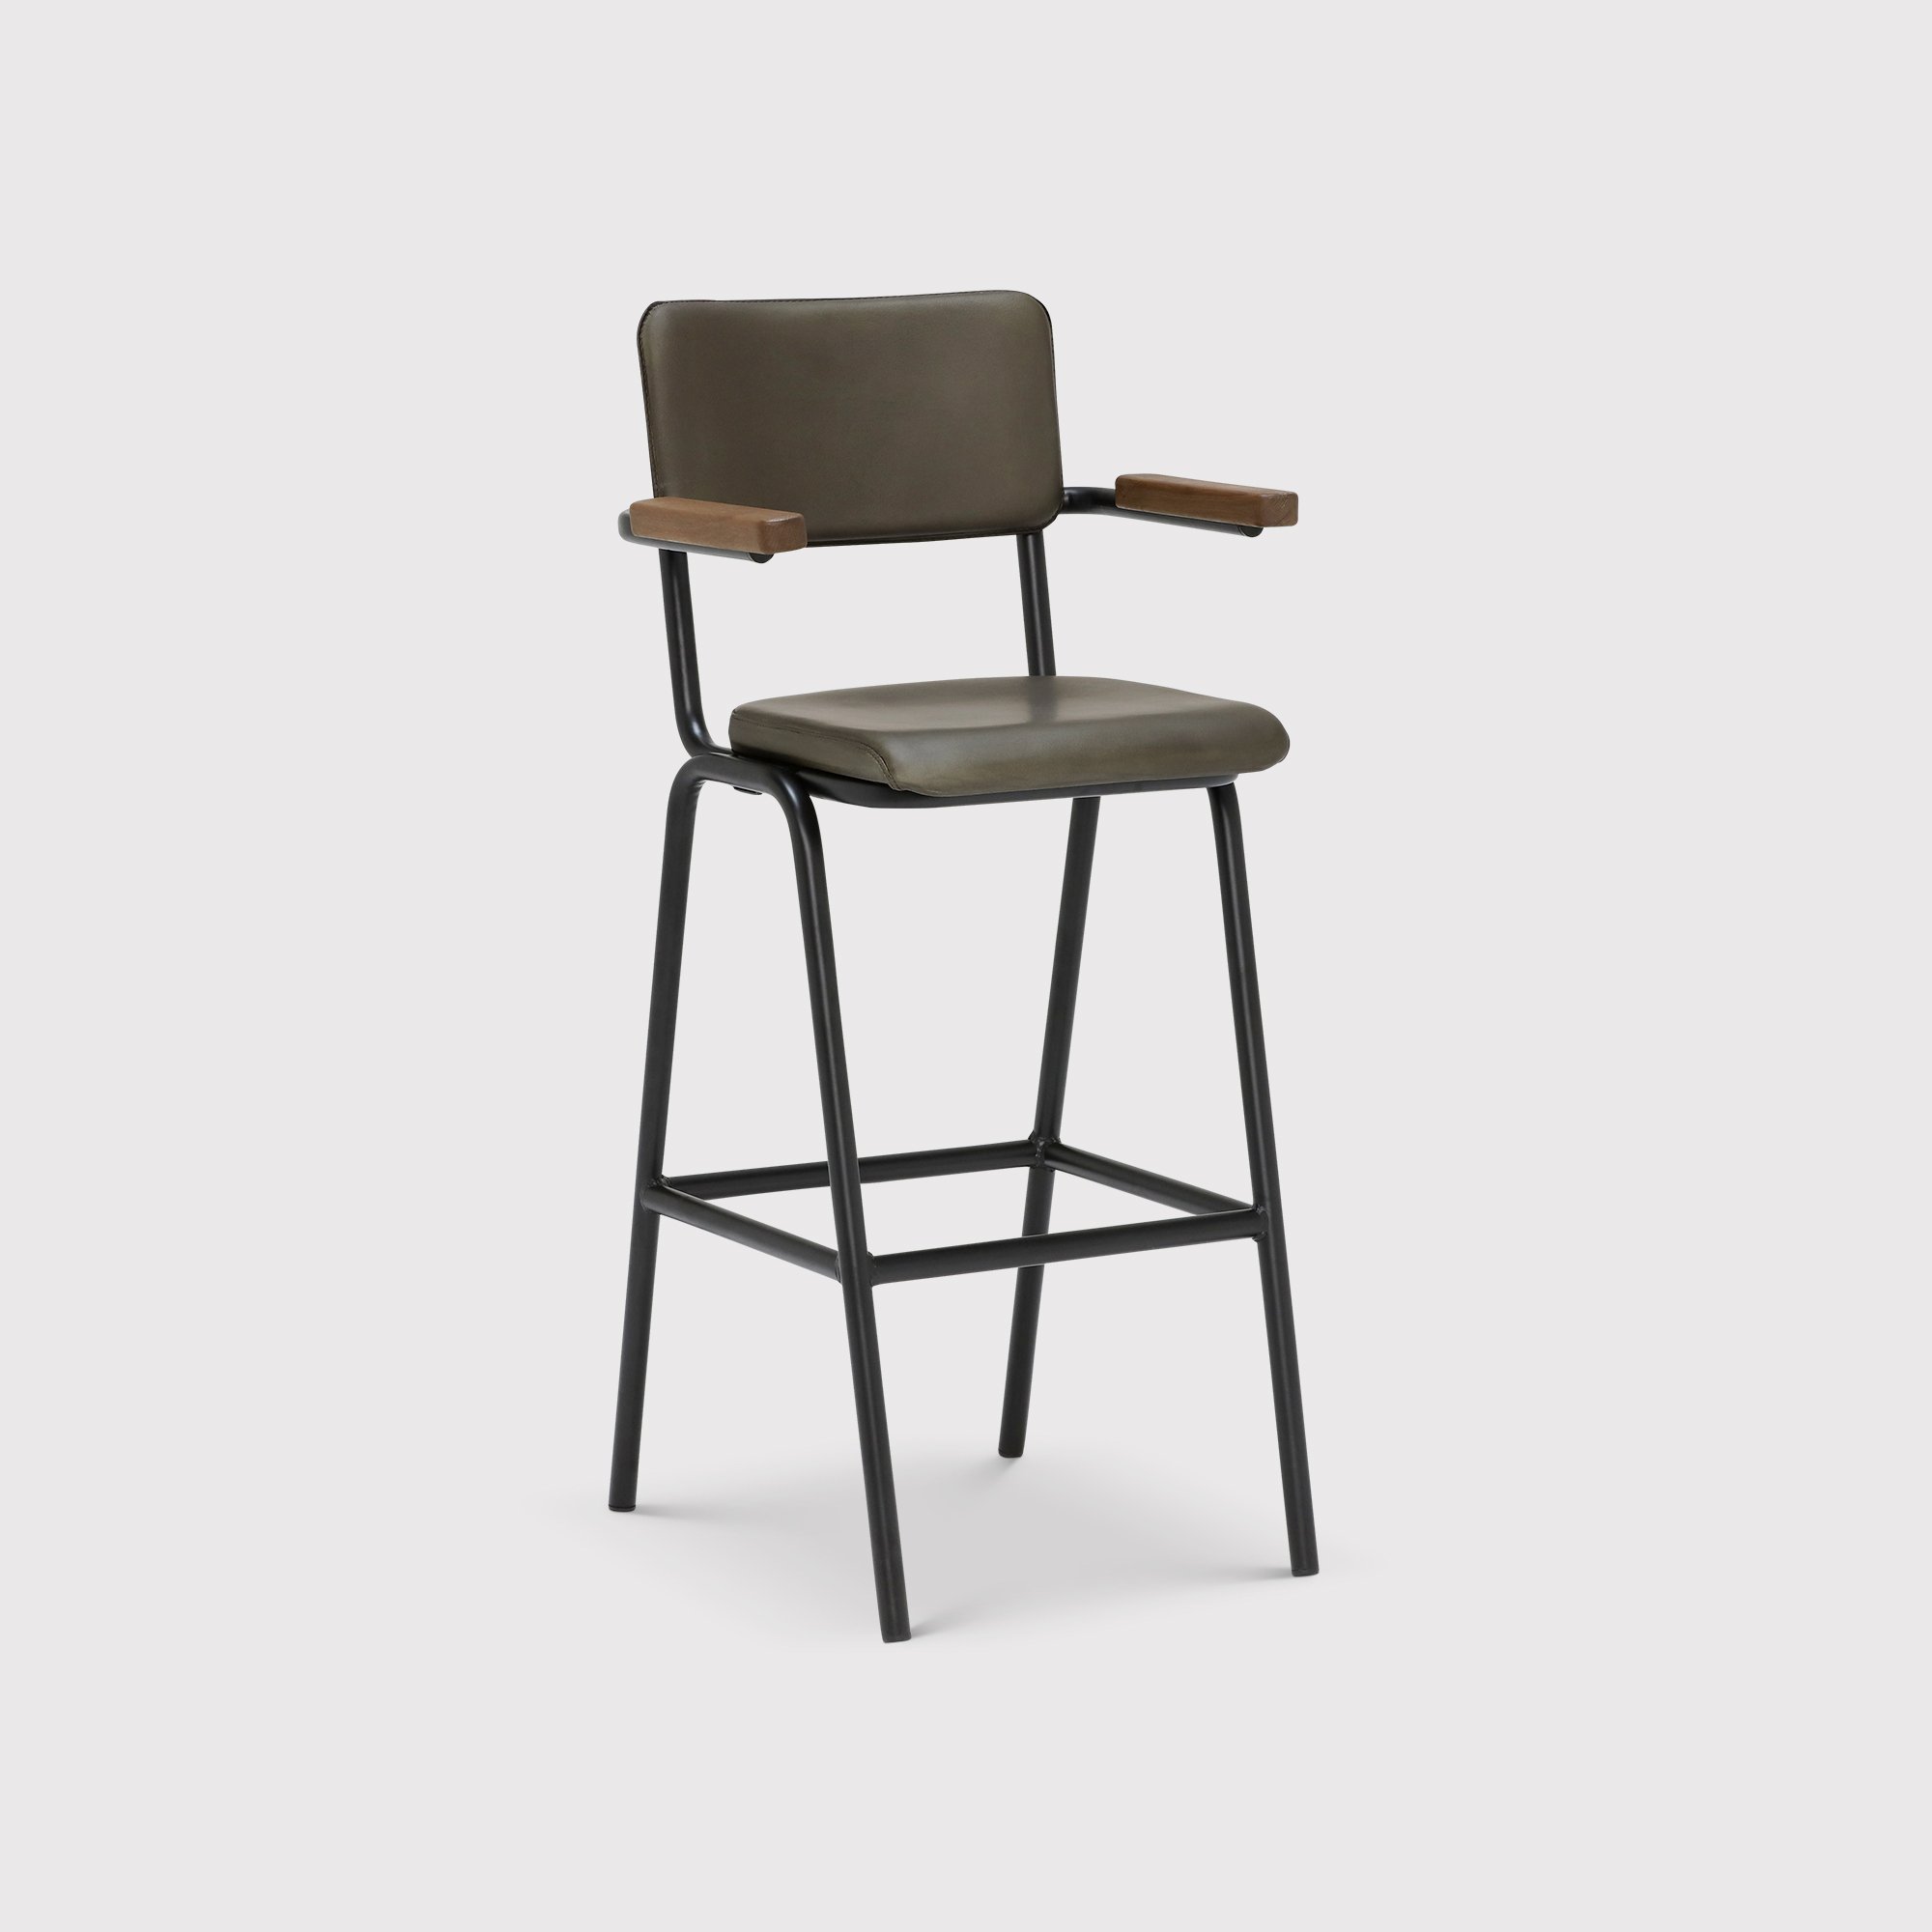 Pure Furniture Twyford Barstool With Arms With Matt Black Frame, Green | Barker & Stonehouse